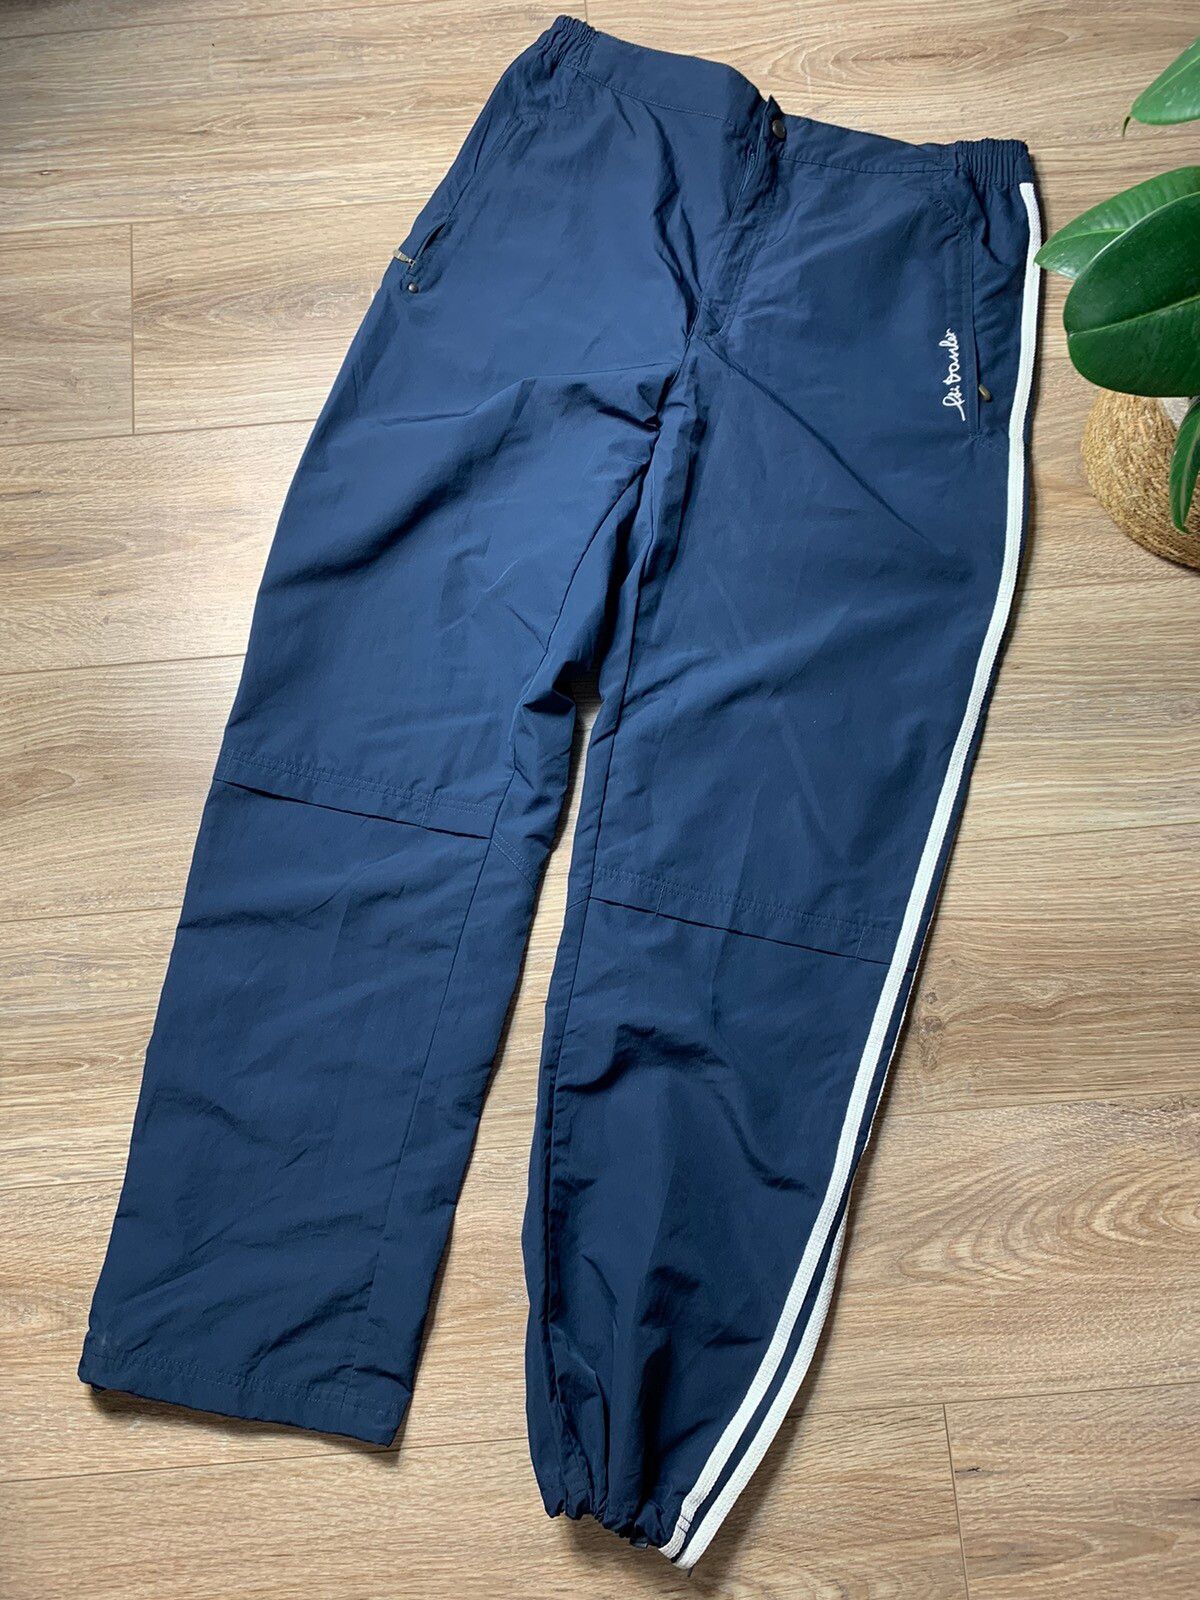 Pre-owned Adidas X Vintage Adidas Track Vintage Pants Nylon Drill Y2k Gorpcore In Navy Blue